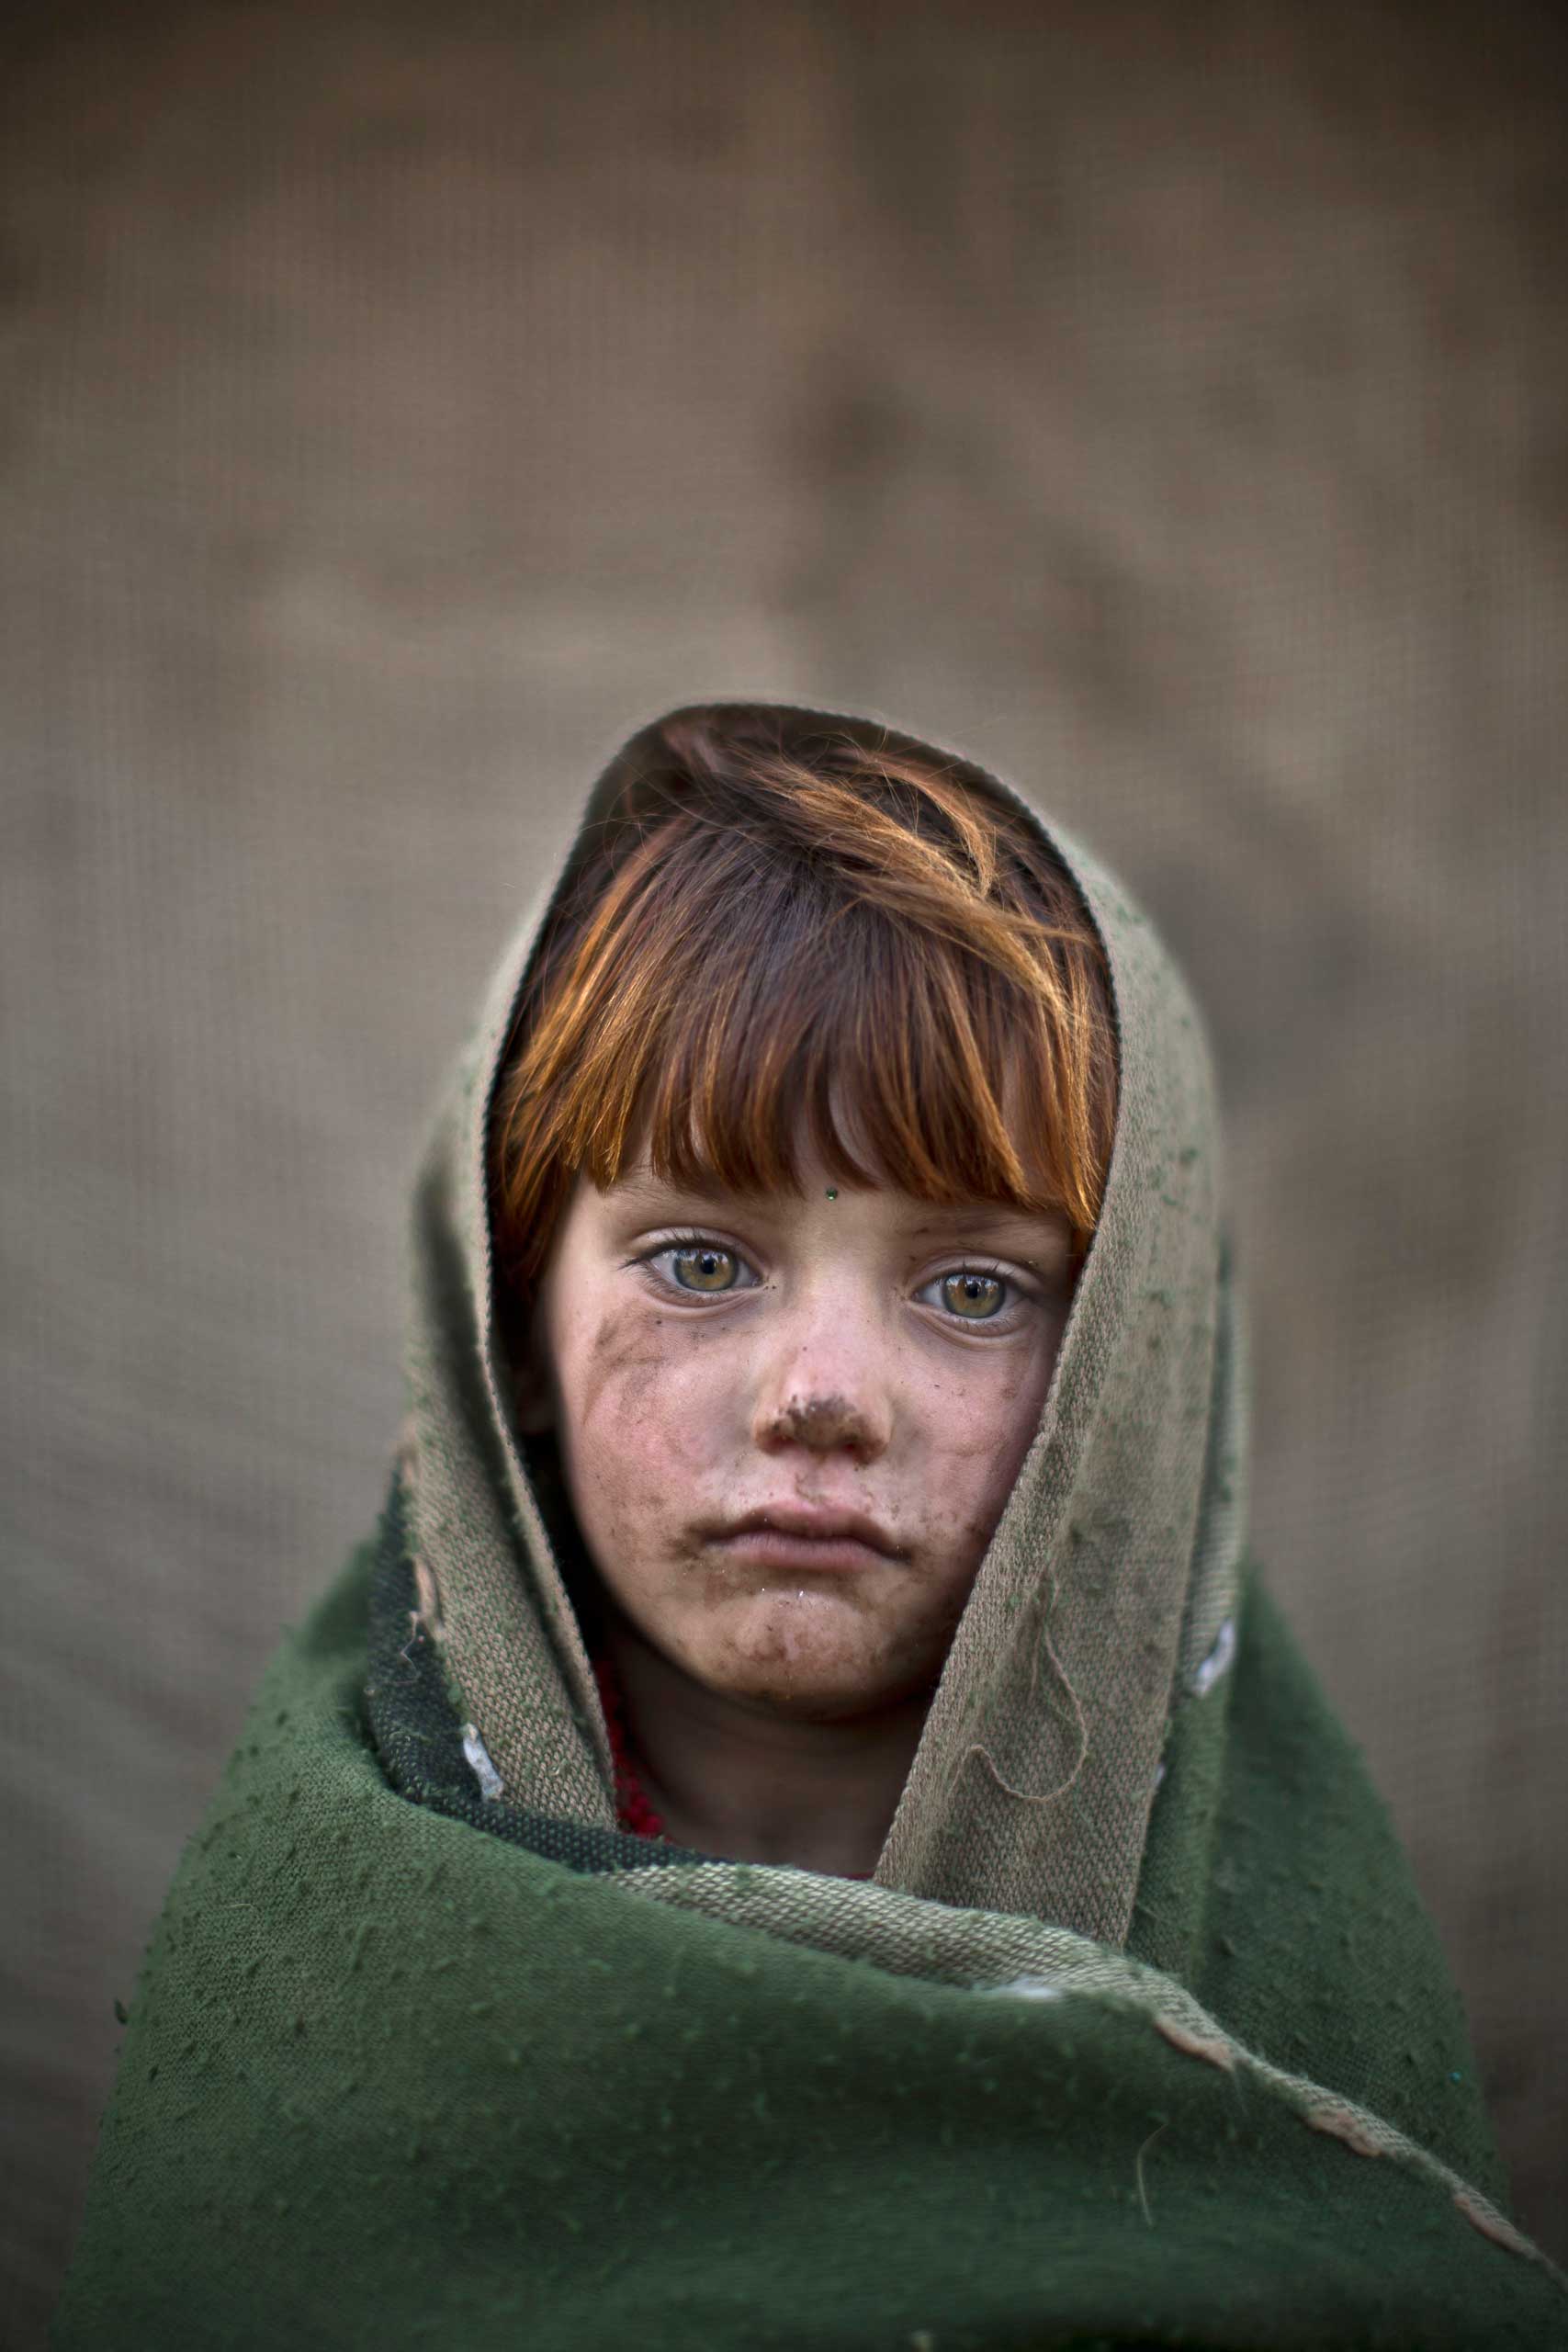 An Afghan refugee girl, laiba Hazrat, 6, poses for a picture, while playing with other children in a slum on the outskirts of Islamabad, Pakistan. Jan. 24, 2014.